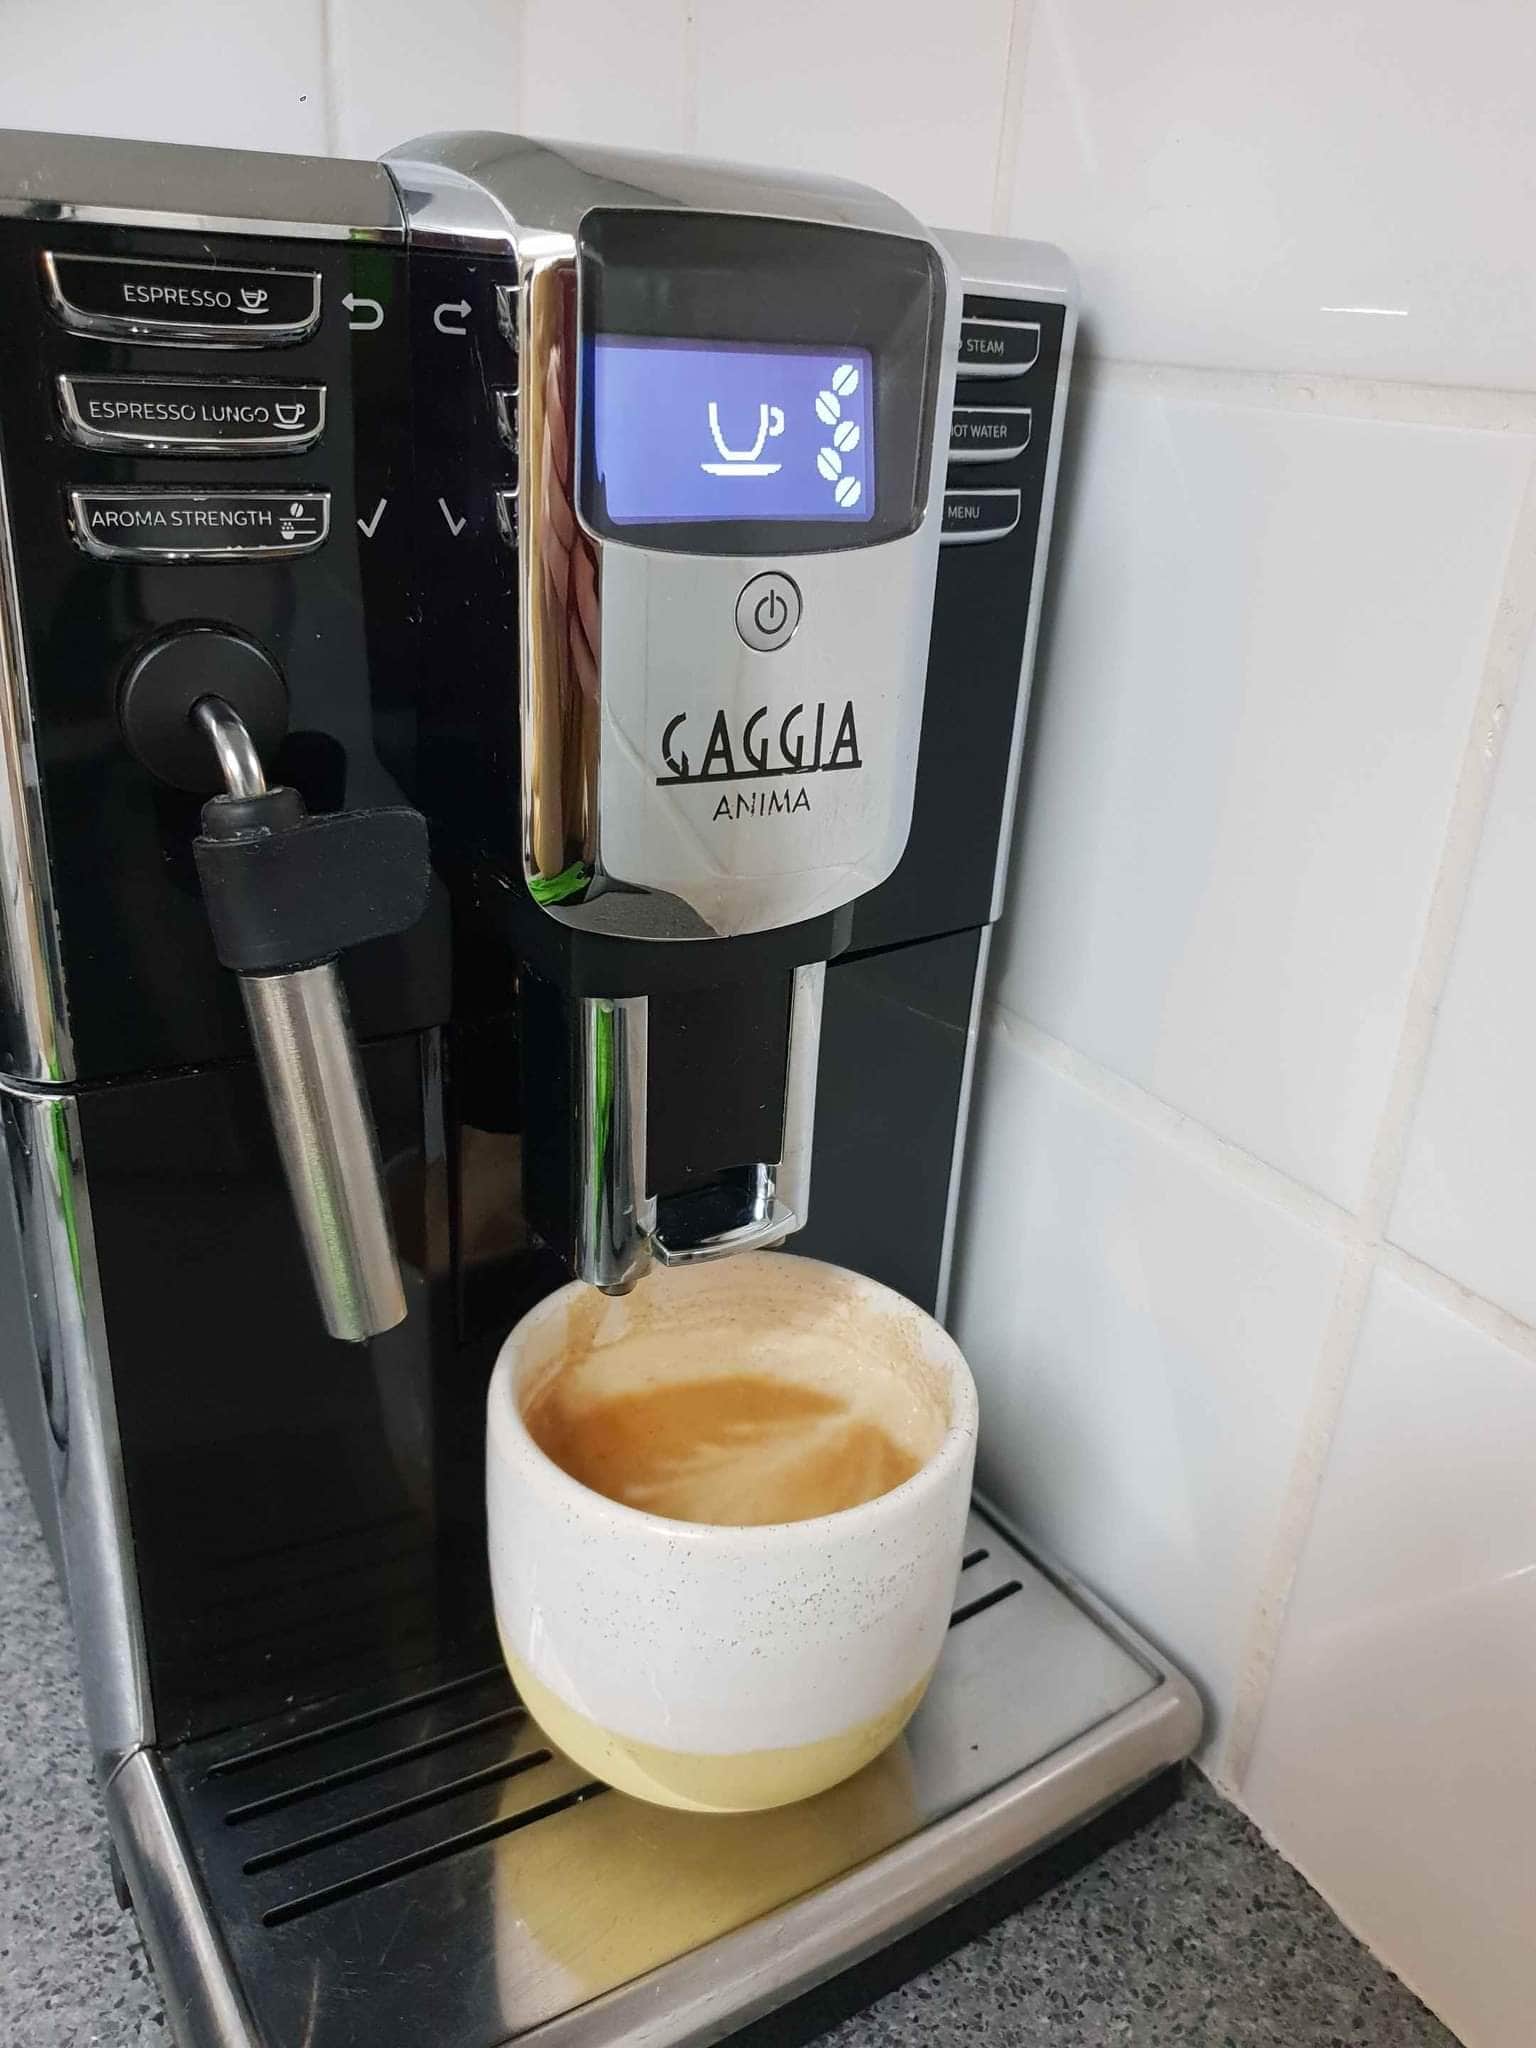 Gaggia Anima is suitable for kitchen space or small bar in the office